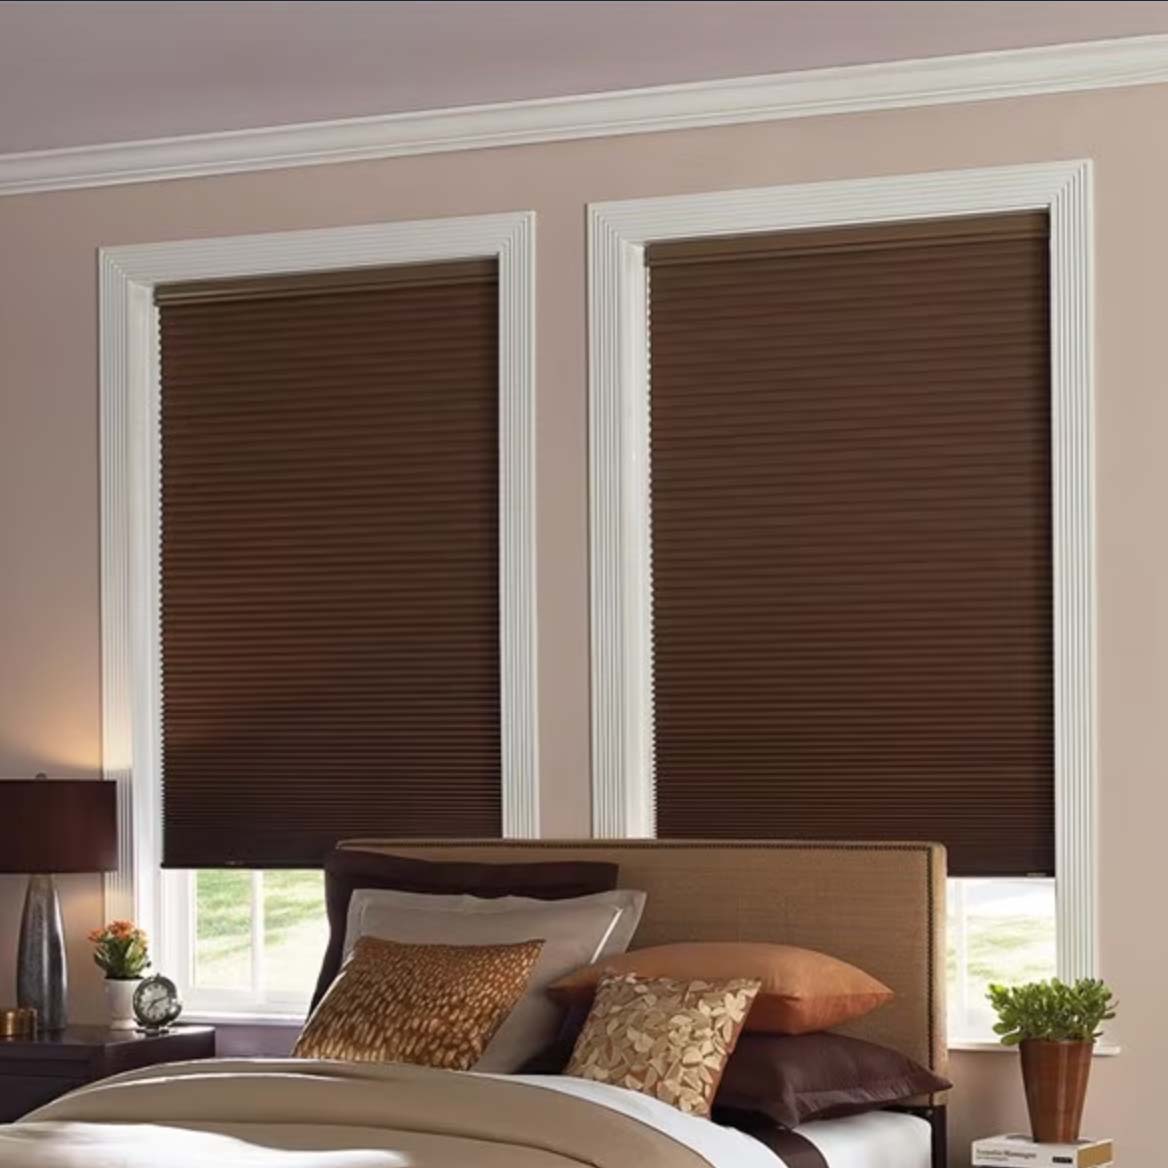 Levolor Blackout Cellular Shades in bedroom setting